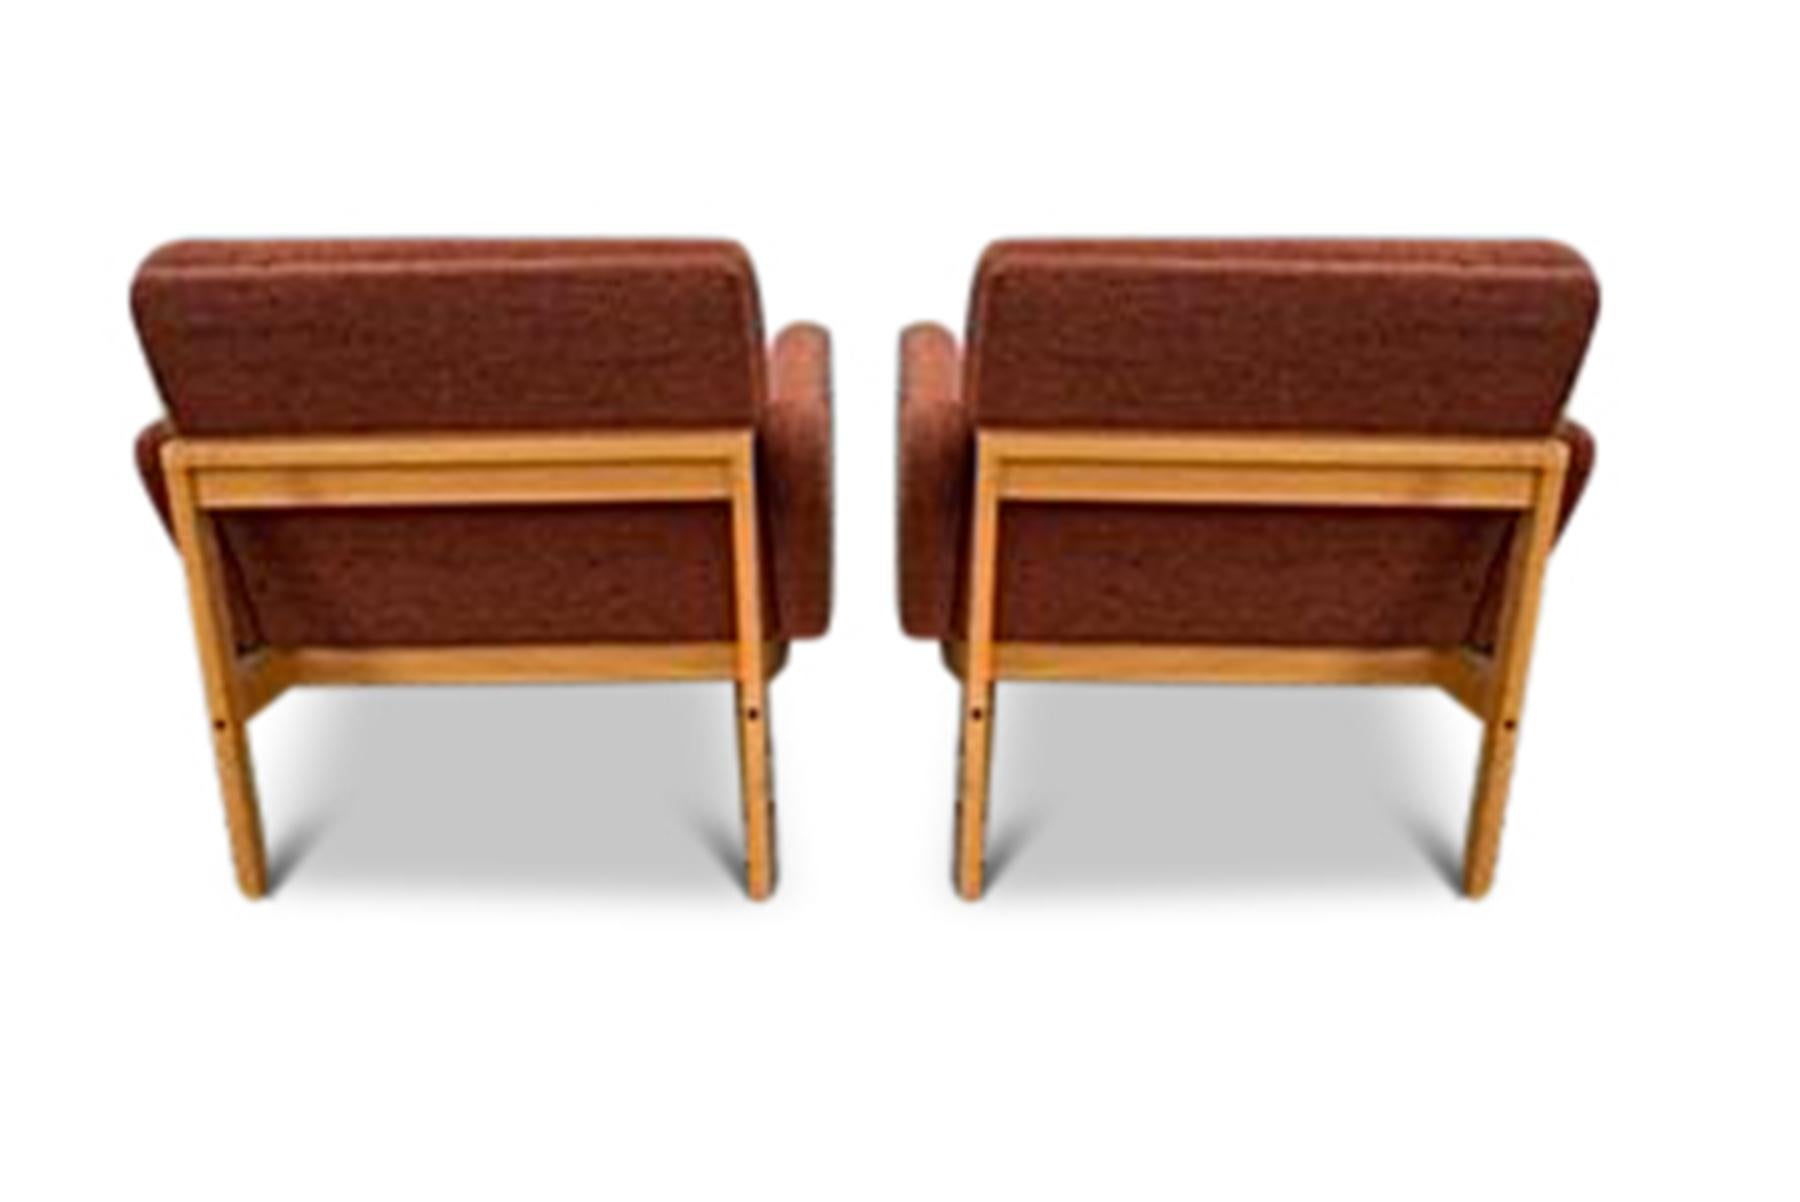 Pair of Moduline Armchairs by Ole Gjerlov-Knudsen In Excellent Condition For Sale In Berkeley, CA